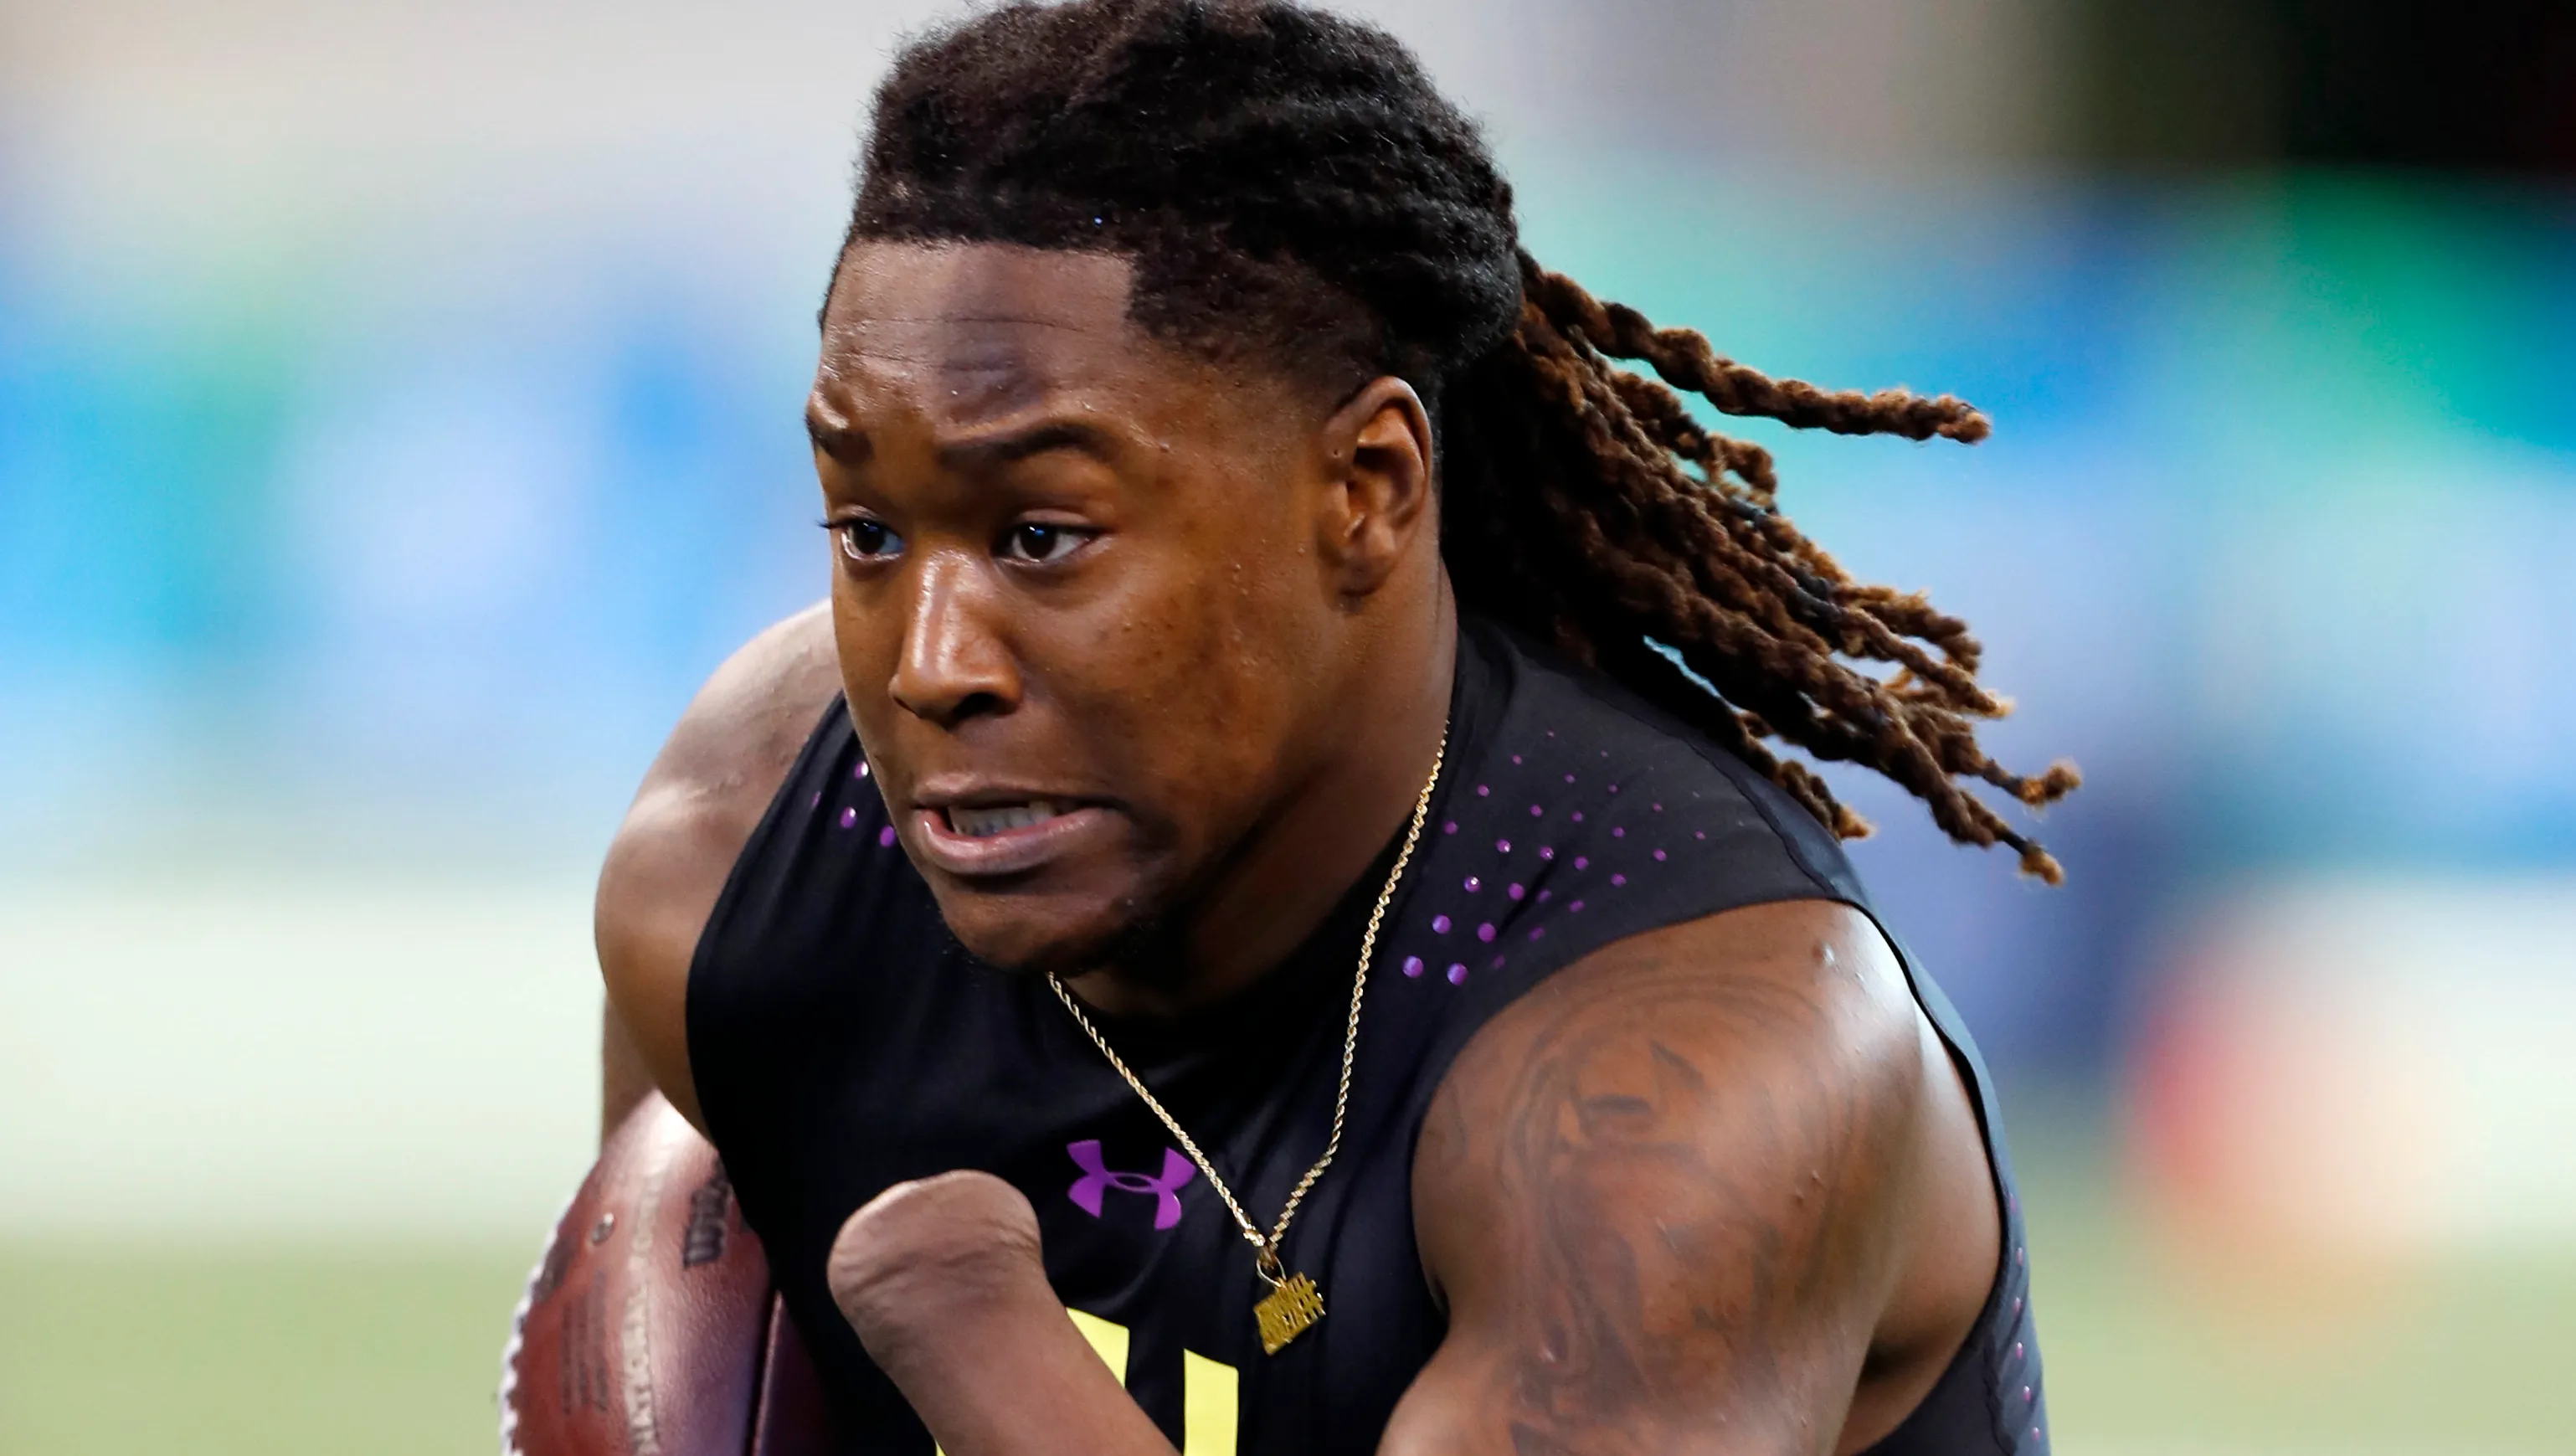 Shaquem Griffin In Talks With Michael B. Jordan For Biopic About His Inspirational Life